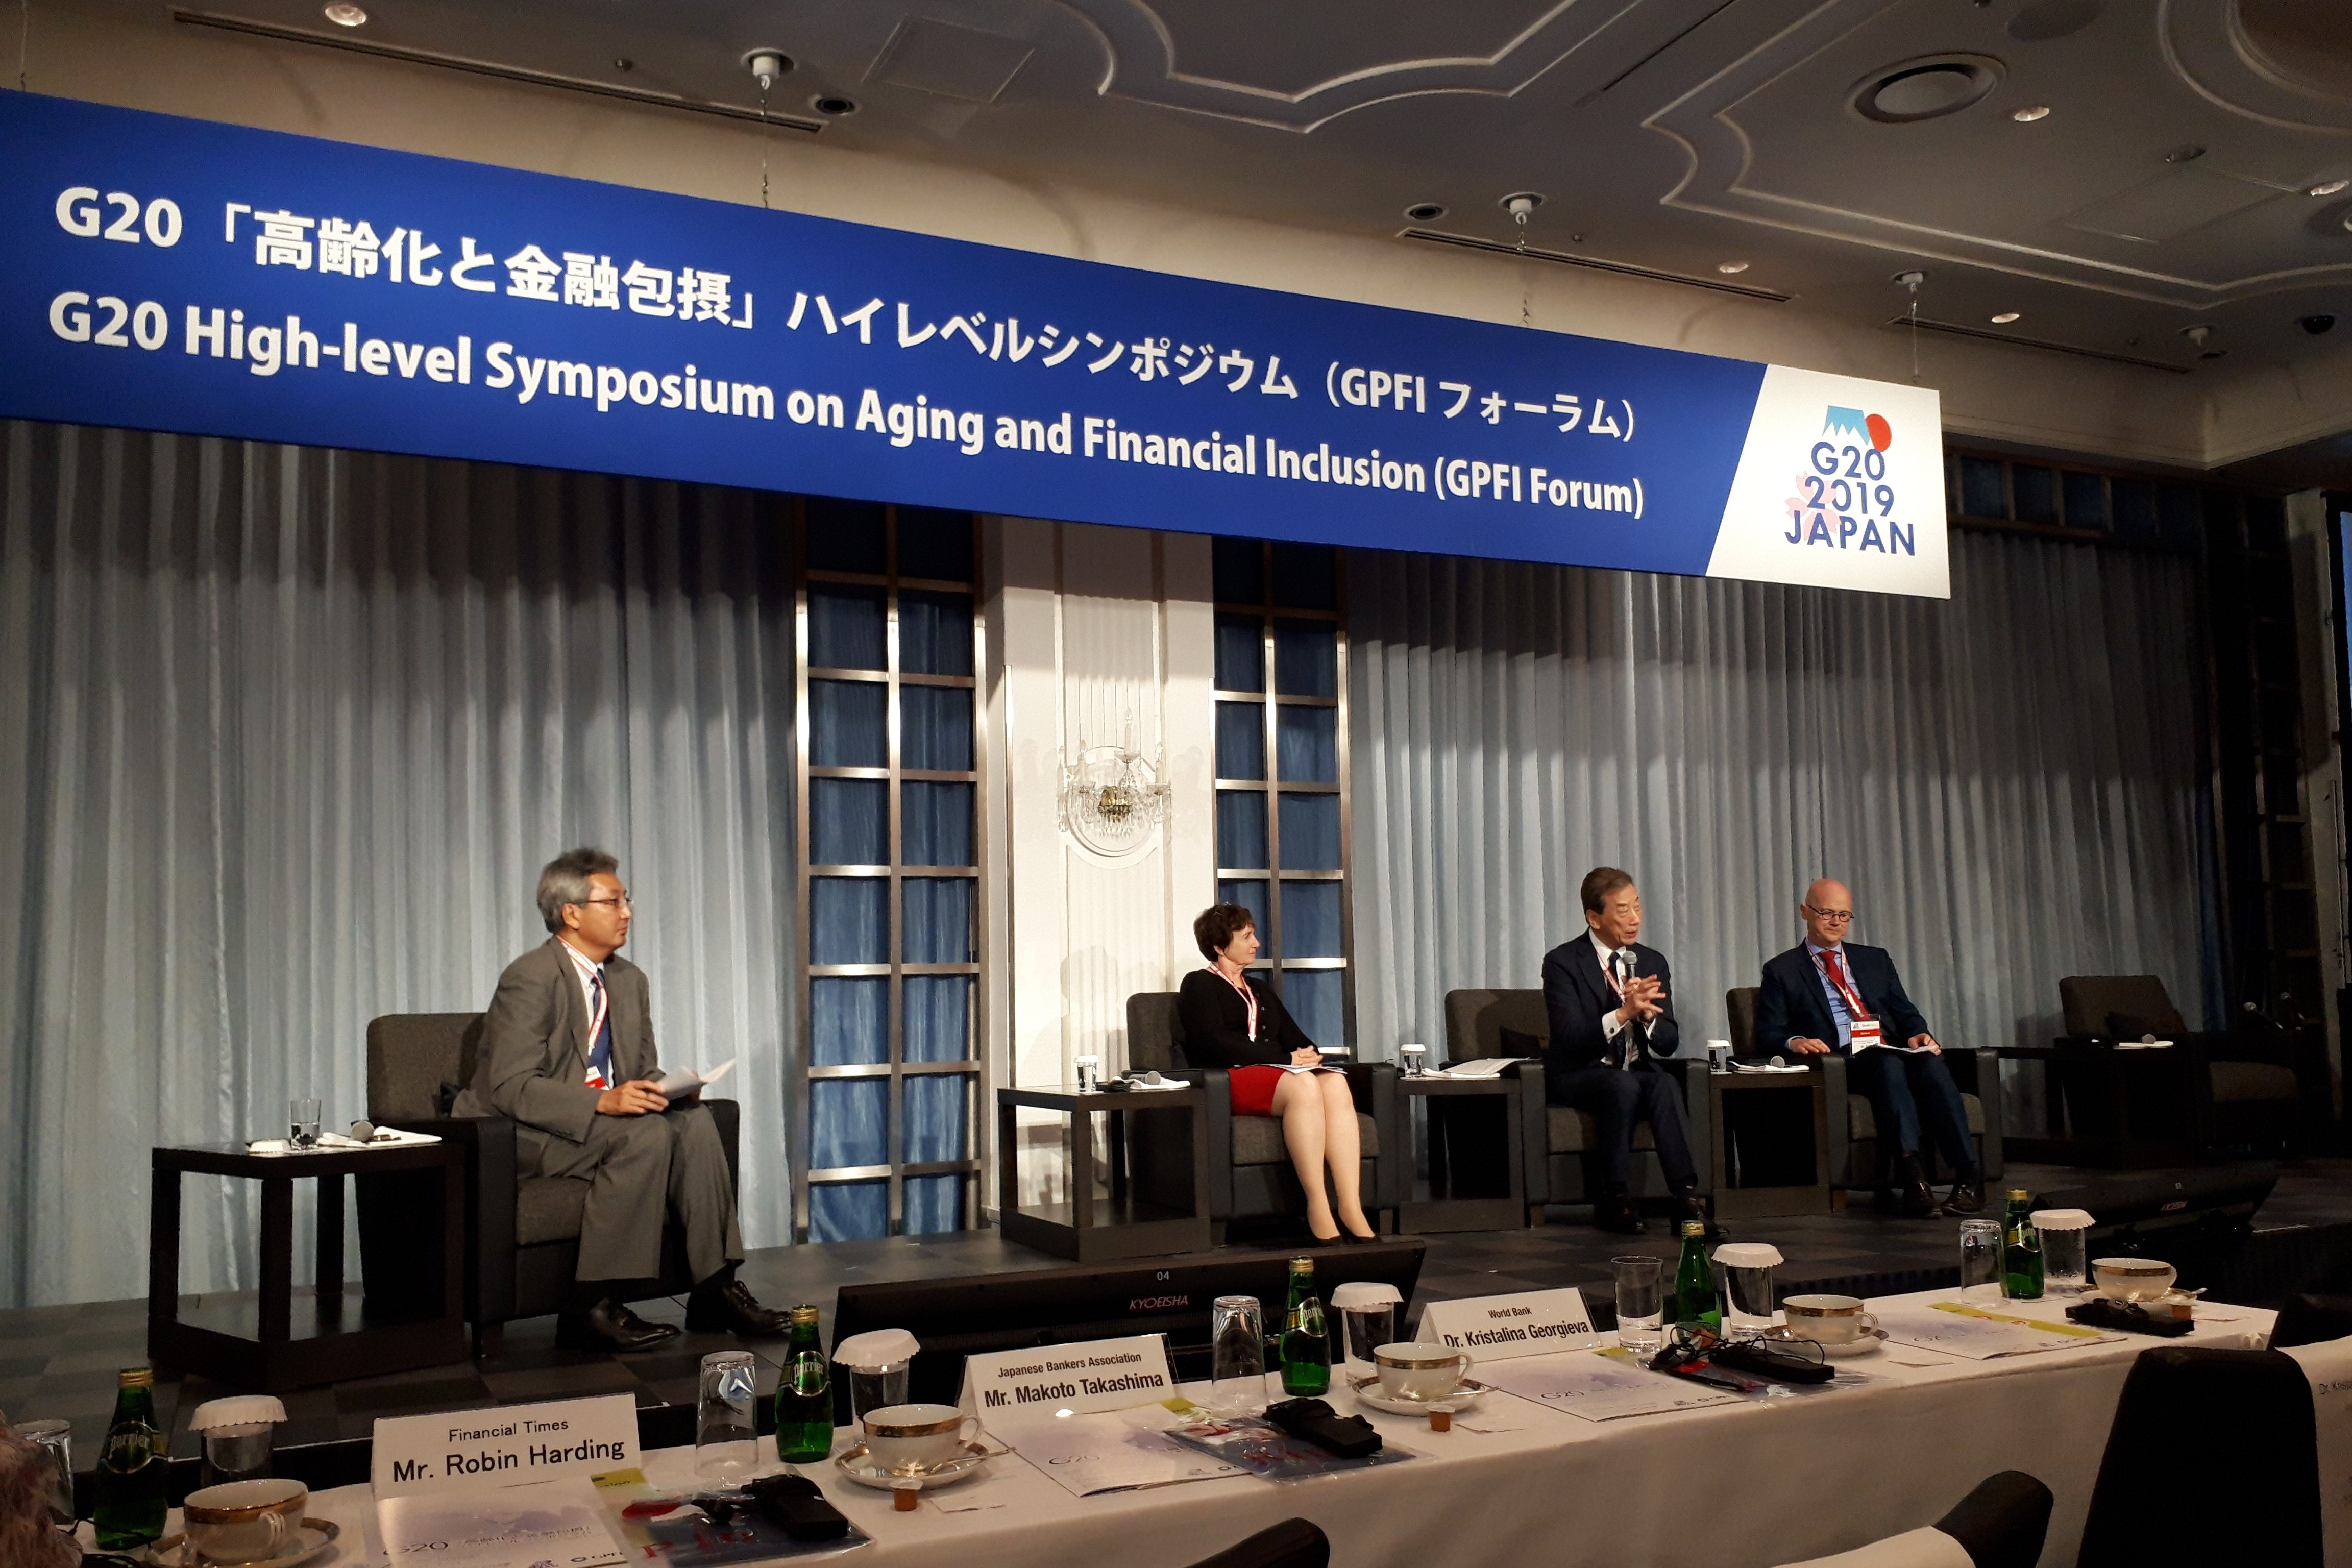 [Lecture] Setting the Scene – Facing the “Age of Aging” (G20 High-level Symposium on Aging and Financial Inclusion, June 7, 2019, Hotel New Otani, Tokyo)